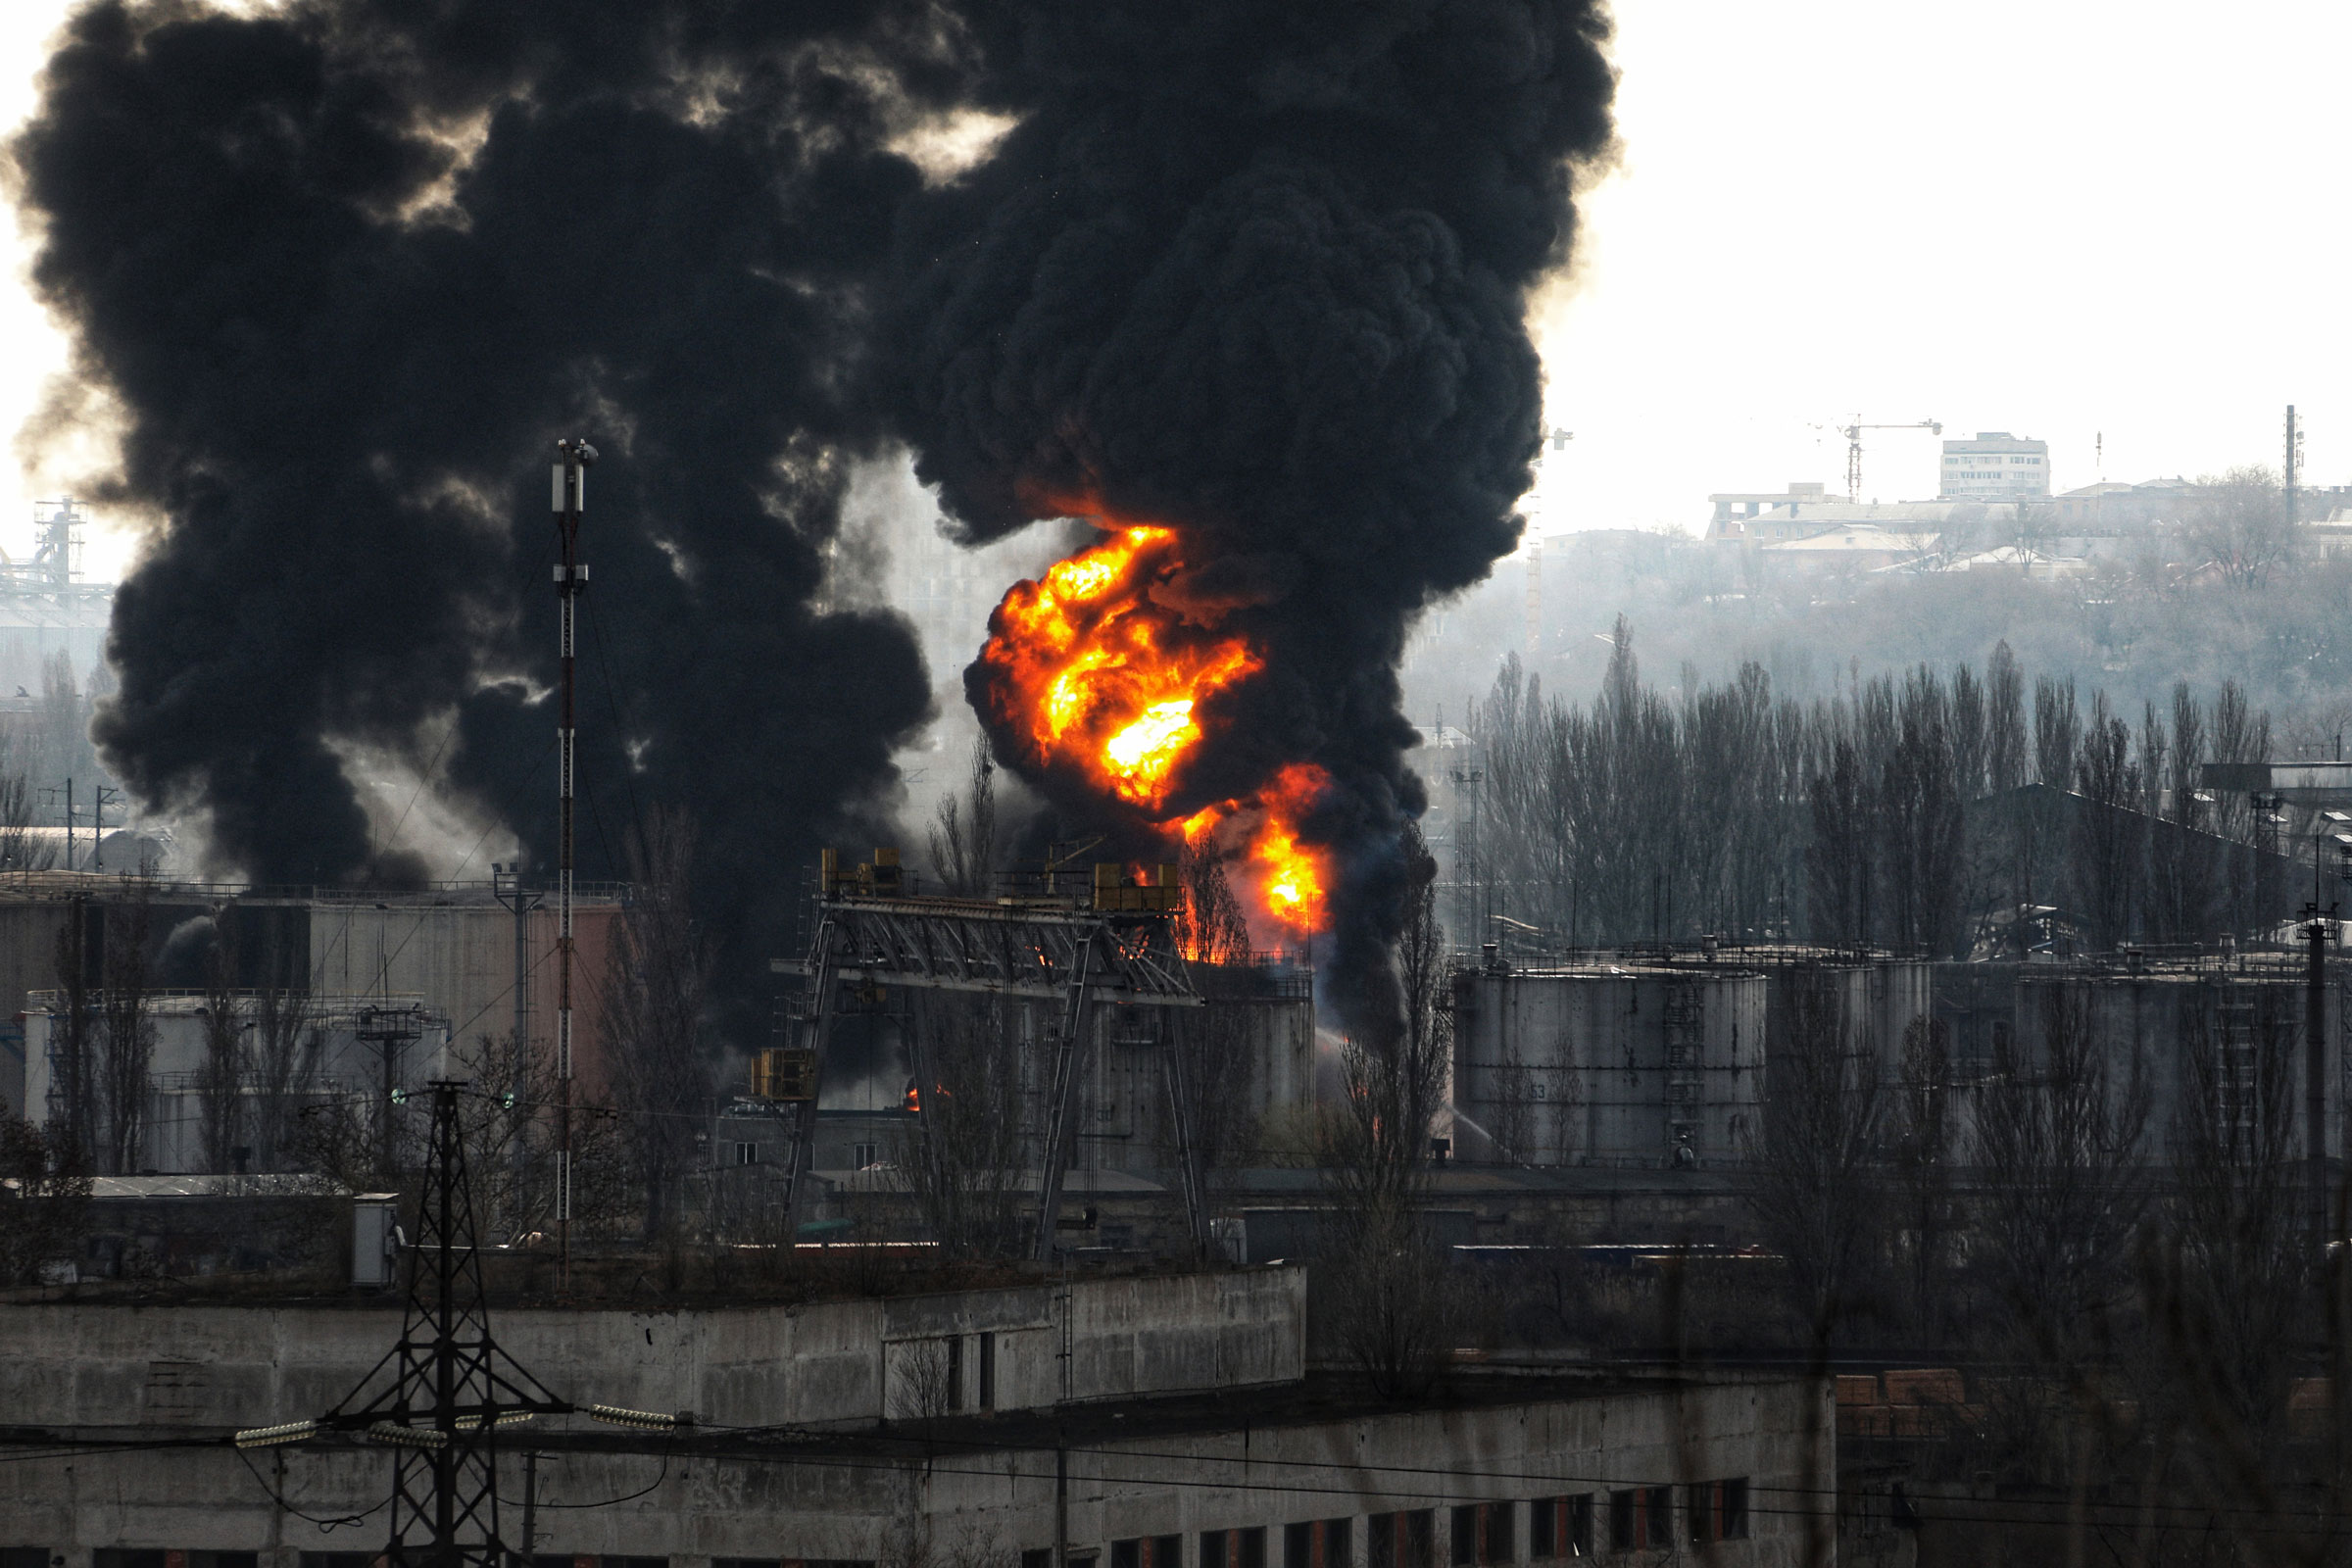 A fire rages after Russian rockets hit an oil refinery and an oil depot on April 3, 2022 in Odesa, southern Ukraine. (Nina Liashonok—Ukrinform/Future Publishing/Getty Images)